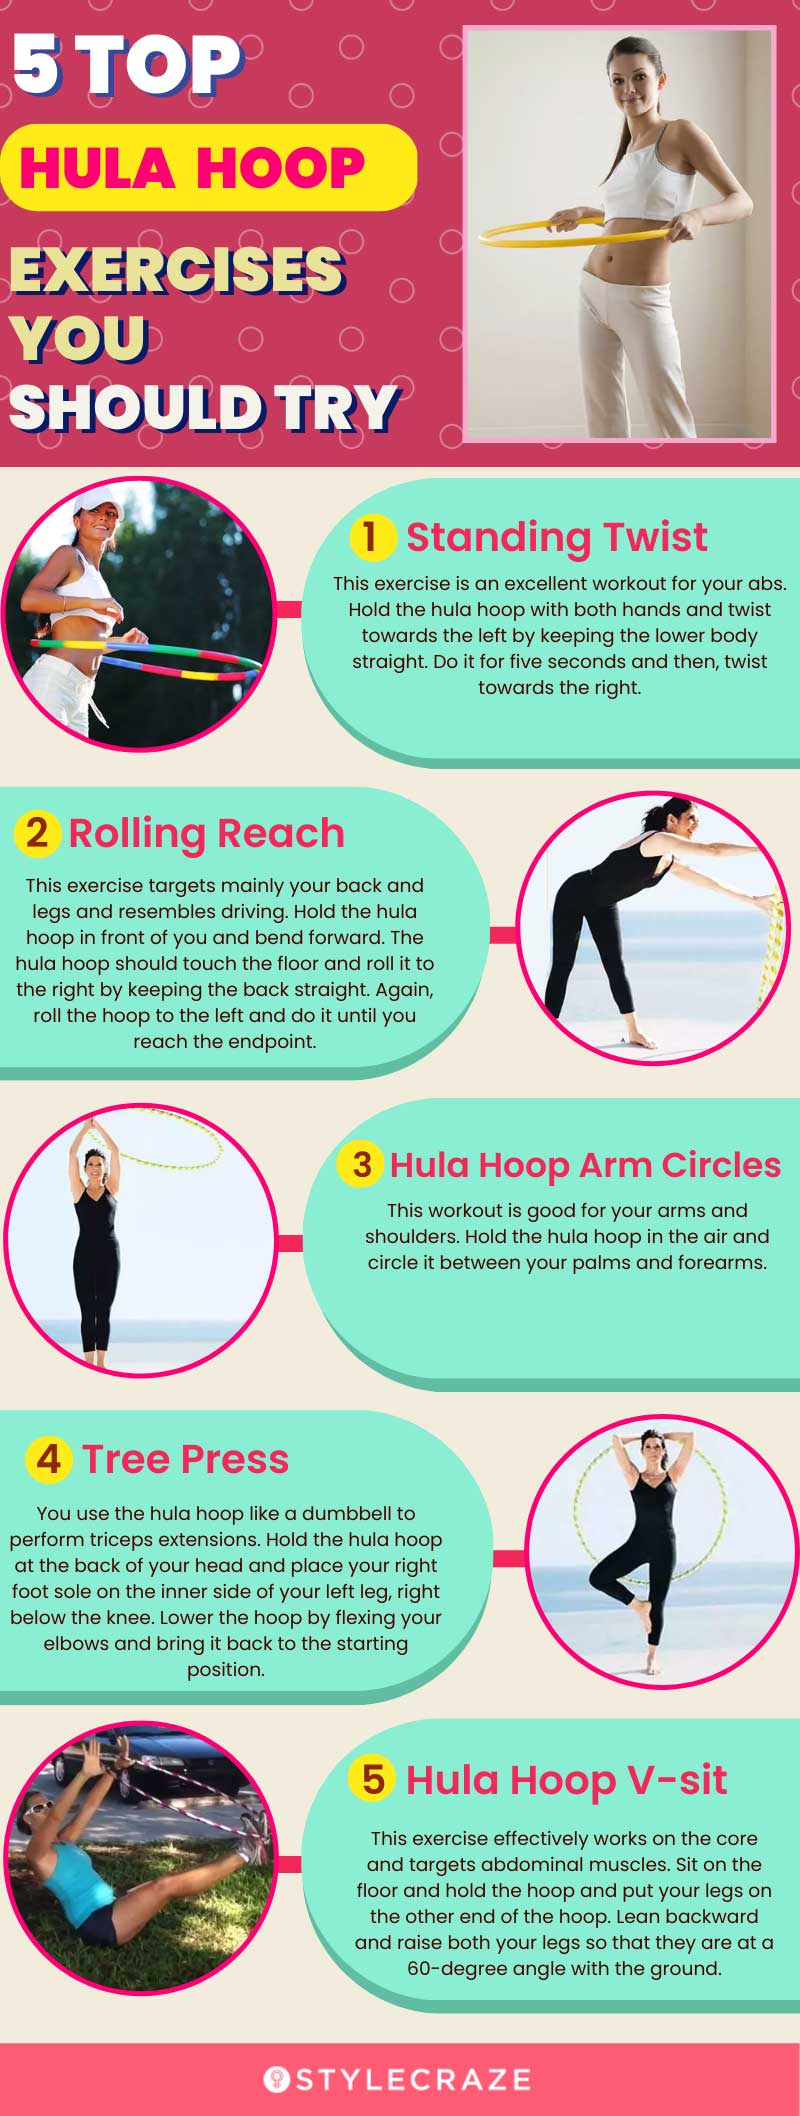 5 top hulahoop excercises you should try (infographic)